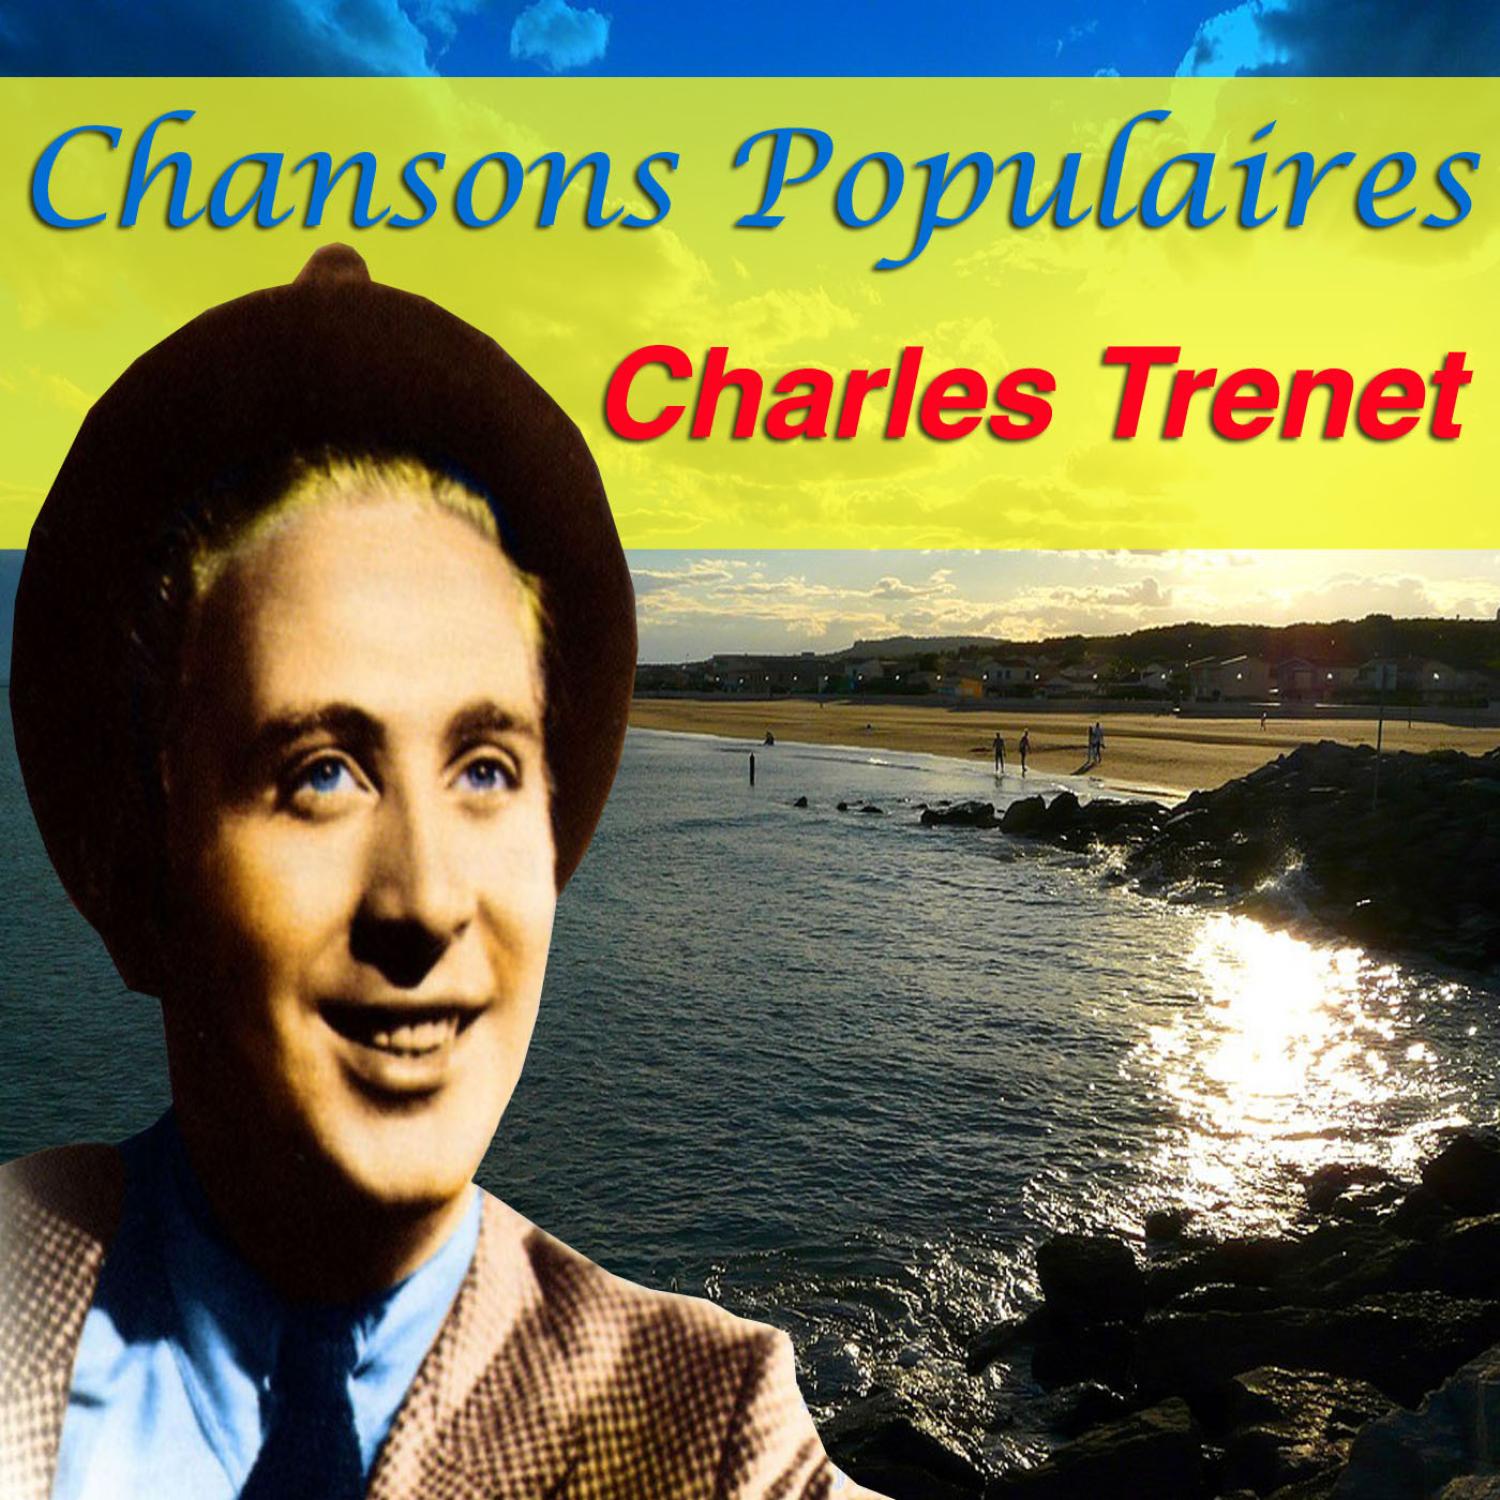 Chansons Populaires - Charles Trenet